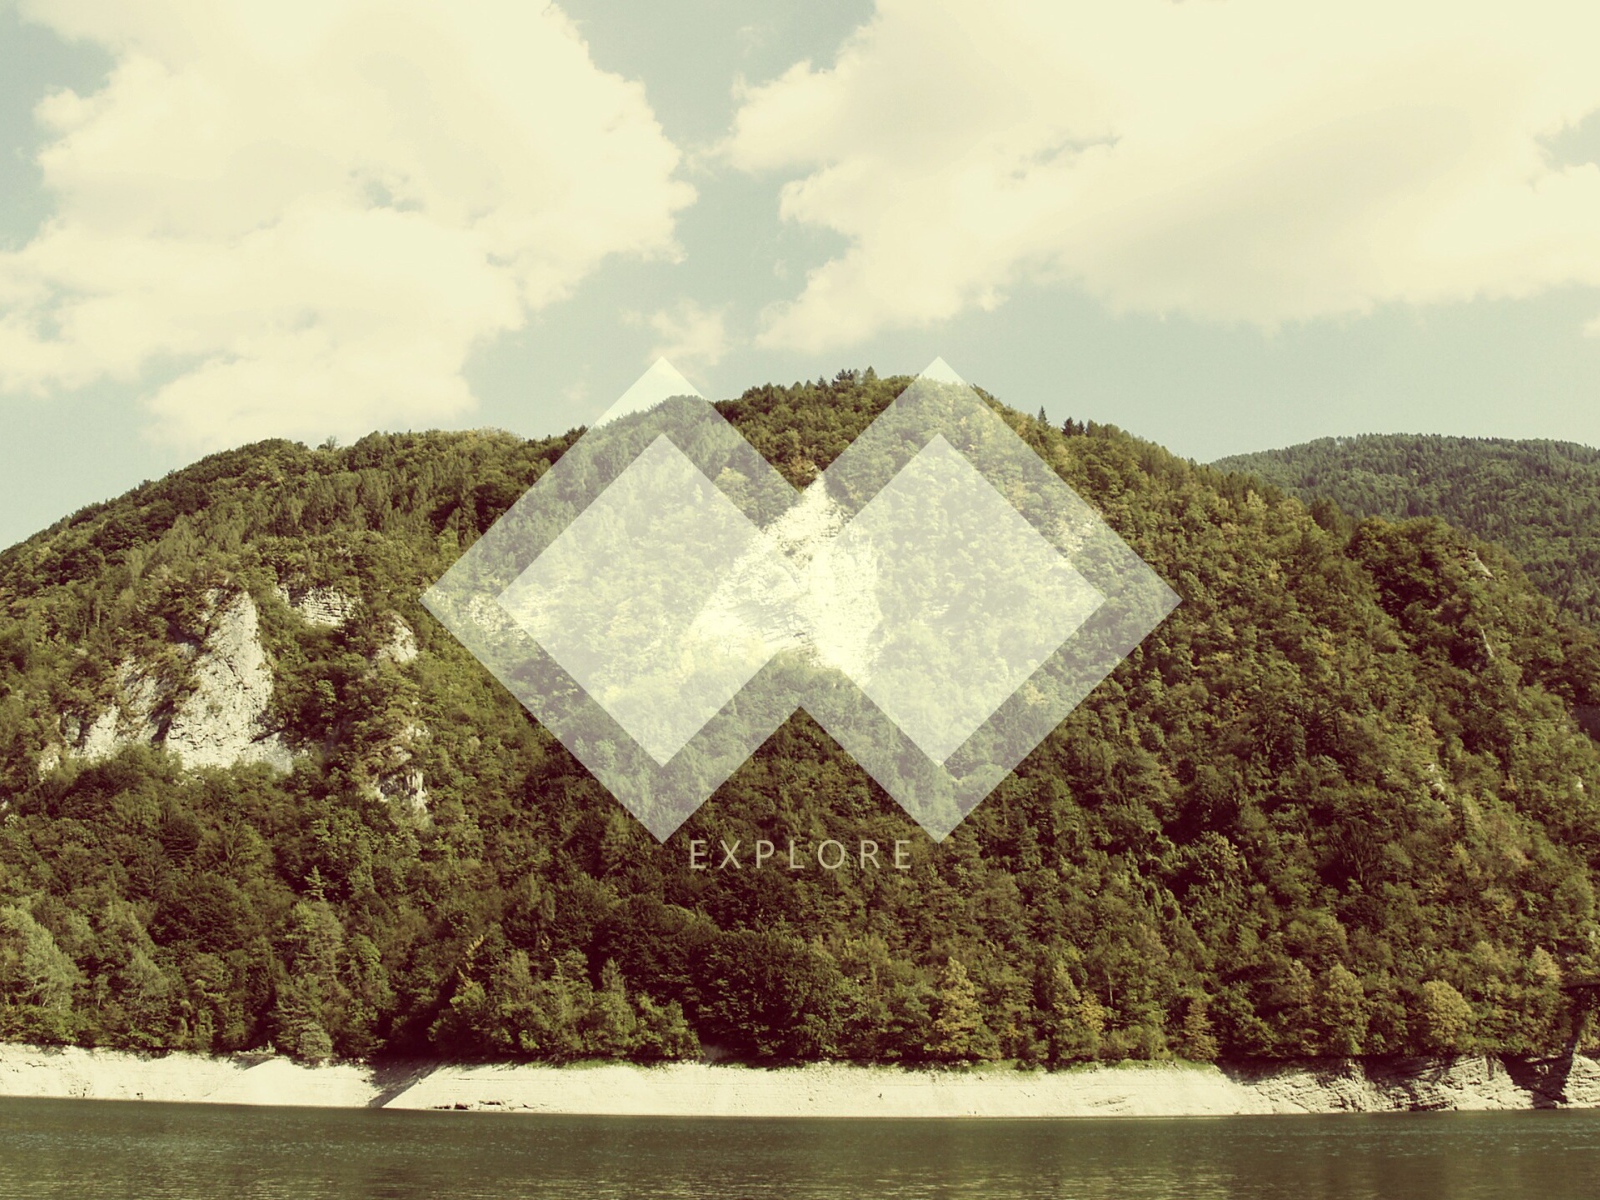 Diamonds on the background of mountains